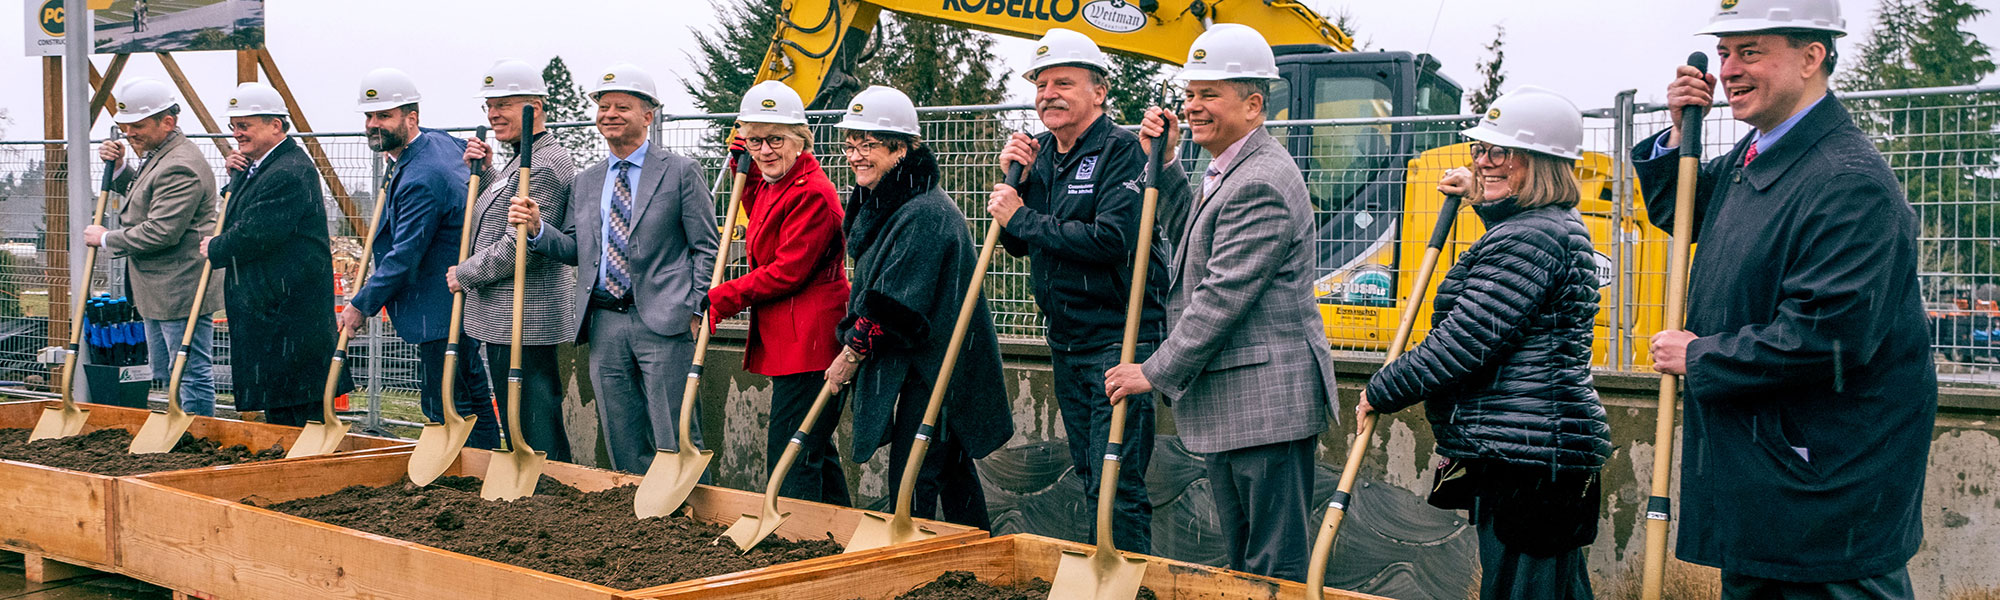 Clackamas County leadership breaking ground at the new courthouse location